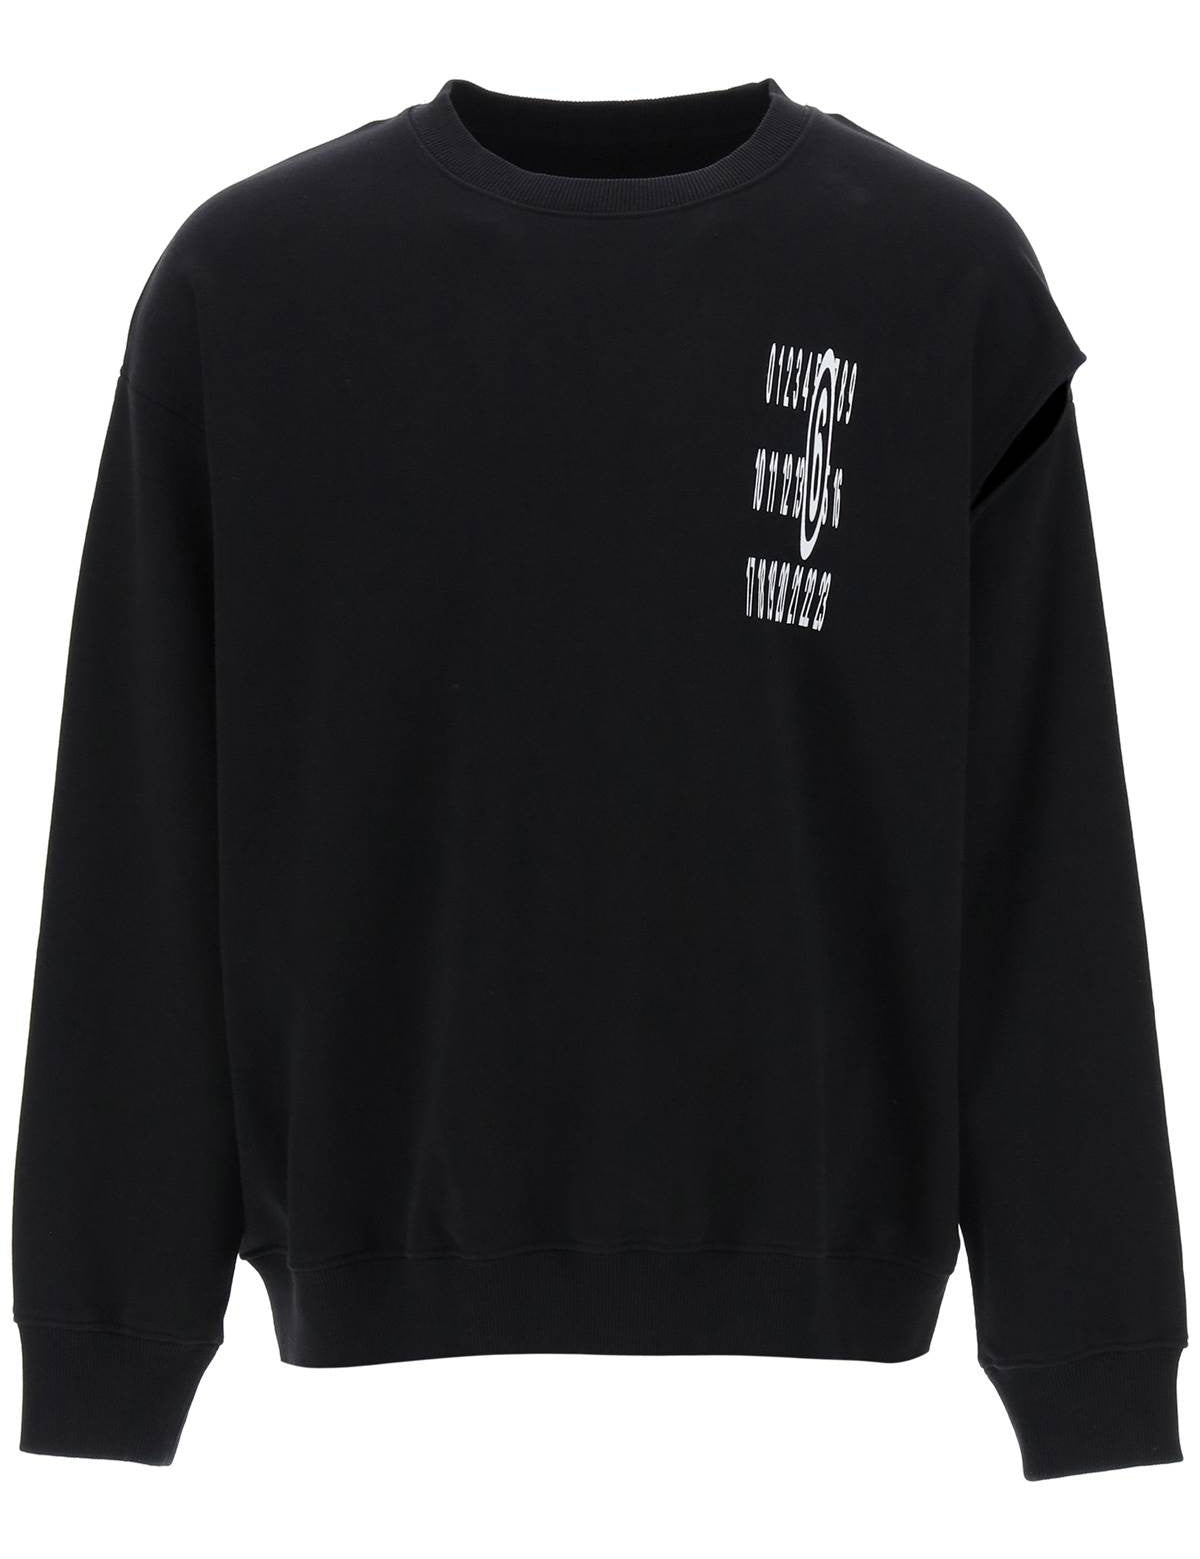 mm6-maison-margiela-sweatshirt-with-cut-out-and-numeric.jpg